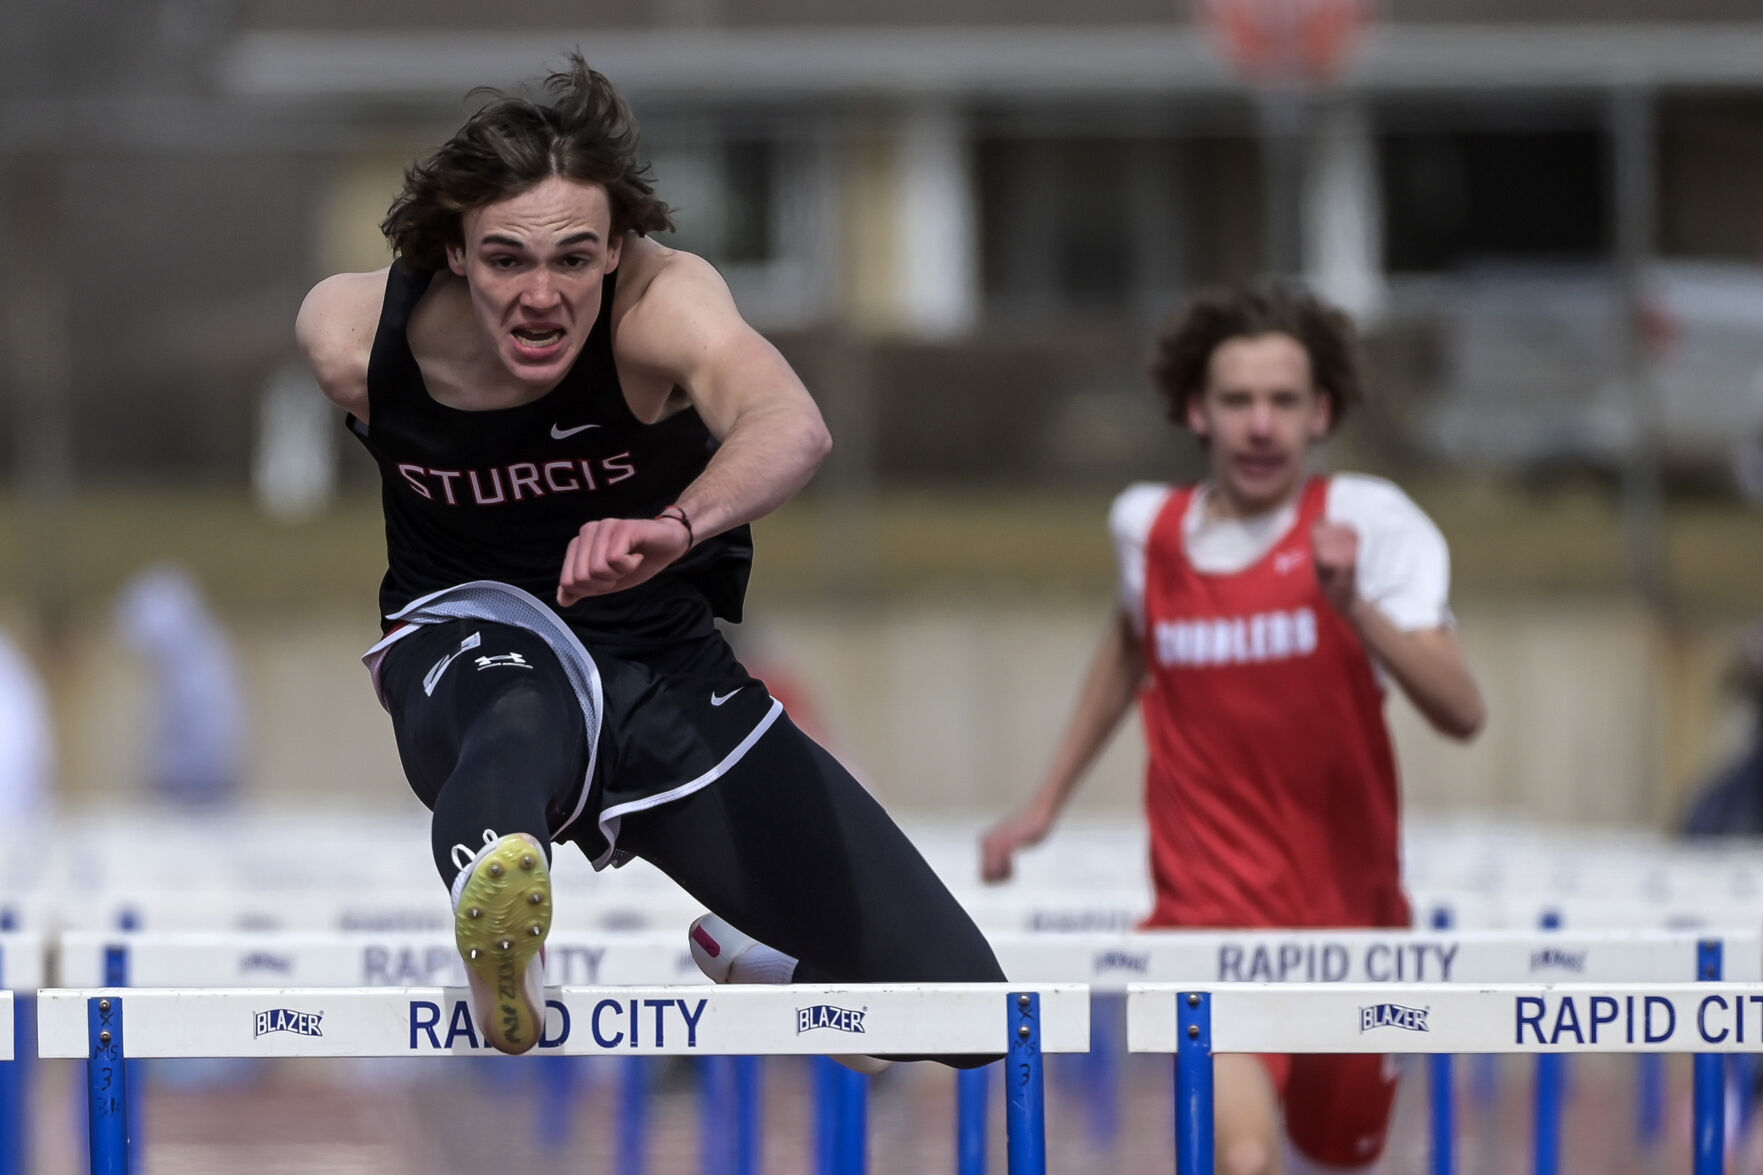 Exciting Start to Track & Field Season: West River Dominates in AA Preview Event